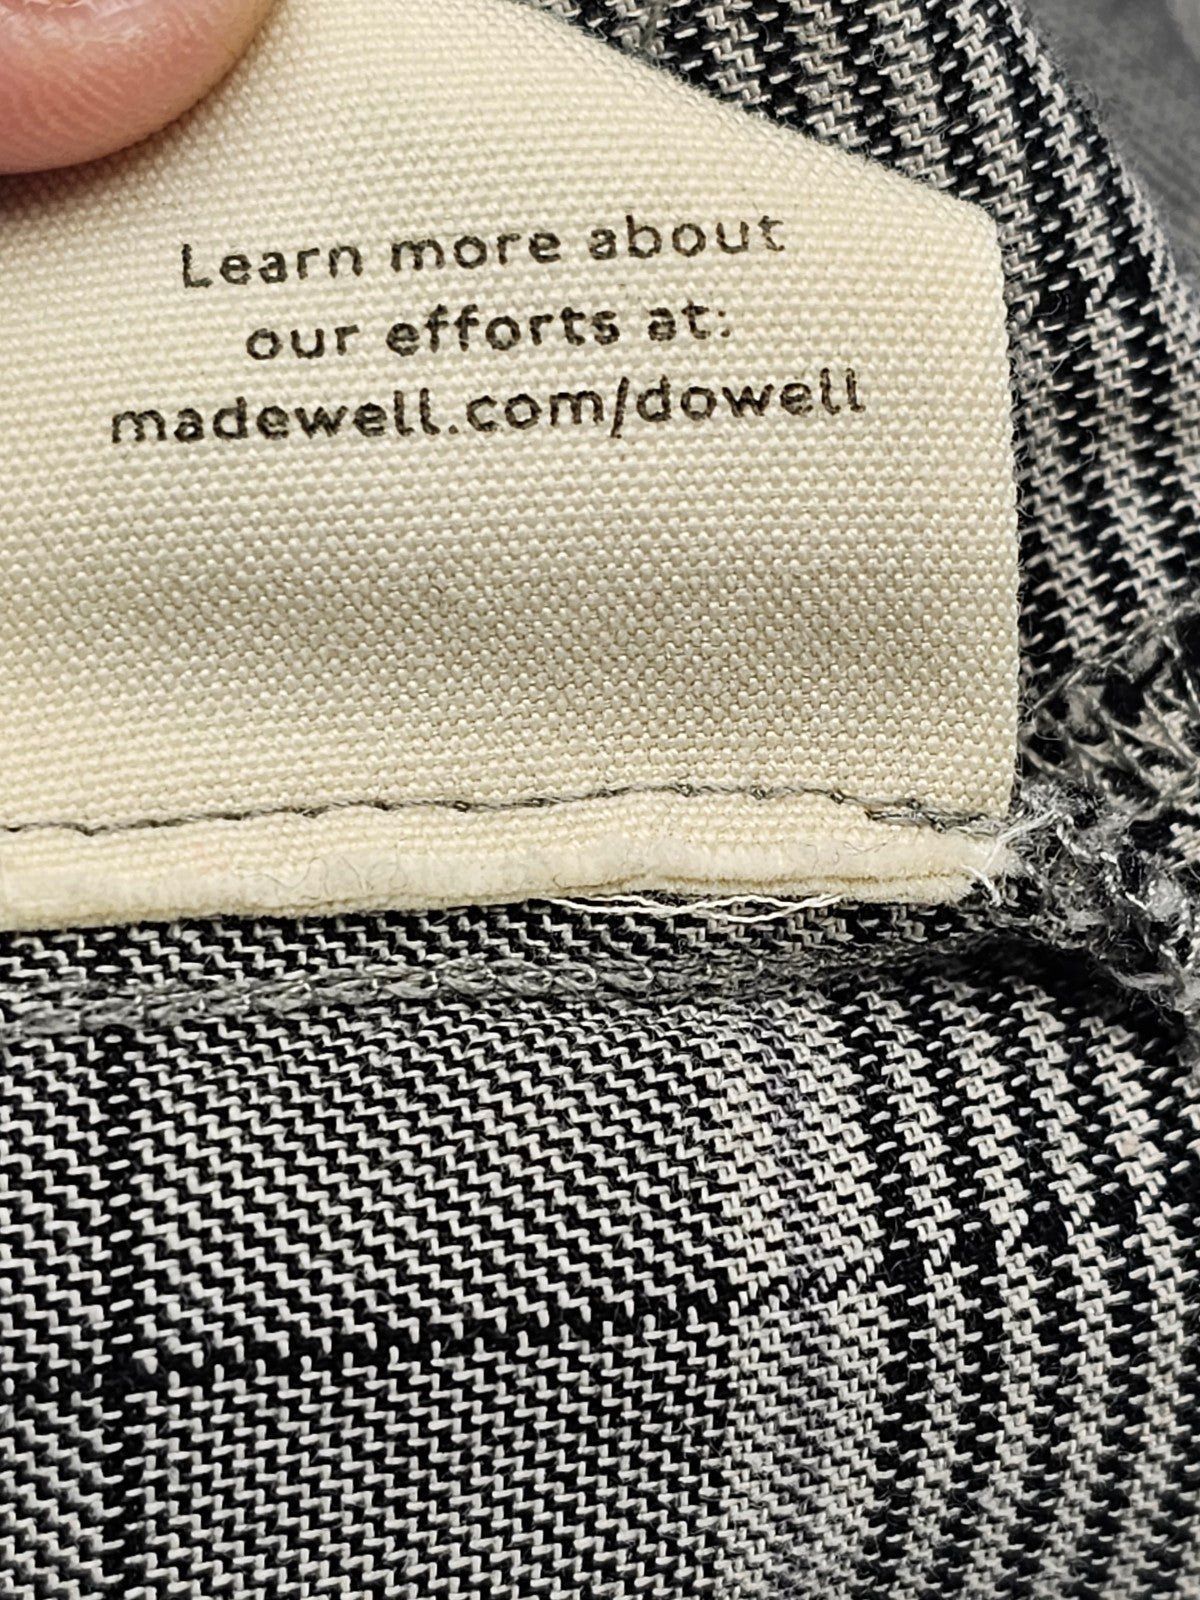 Wholesale price MADEWELL Large Top Plaid Westlake Shirt Boxy Black White Houndstooth Collared lNOhZVOlC all for you